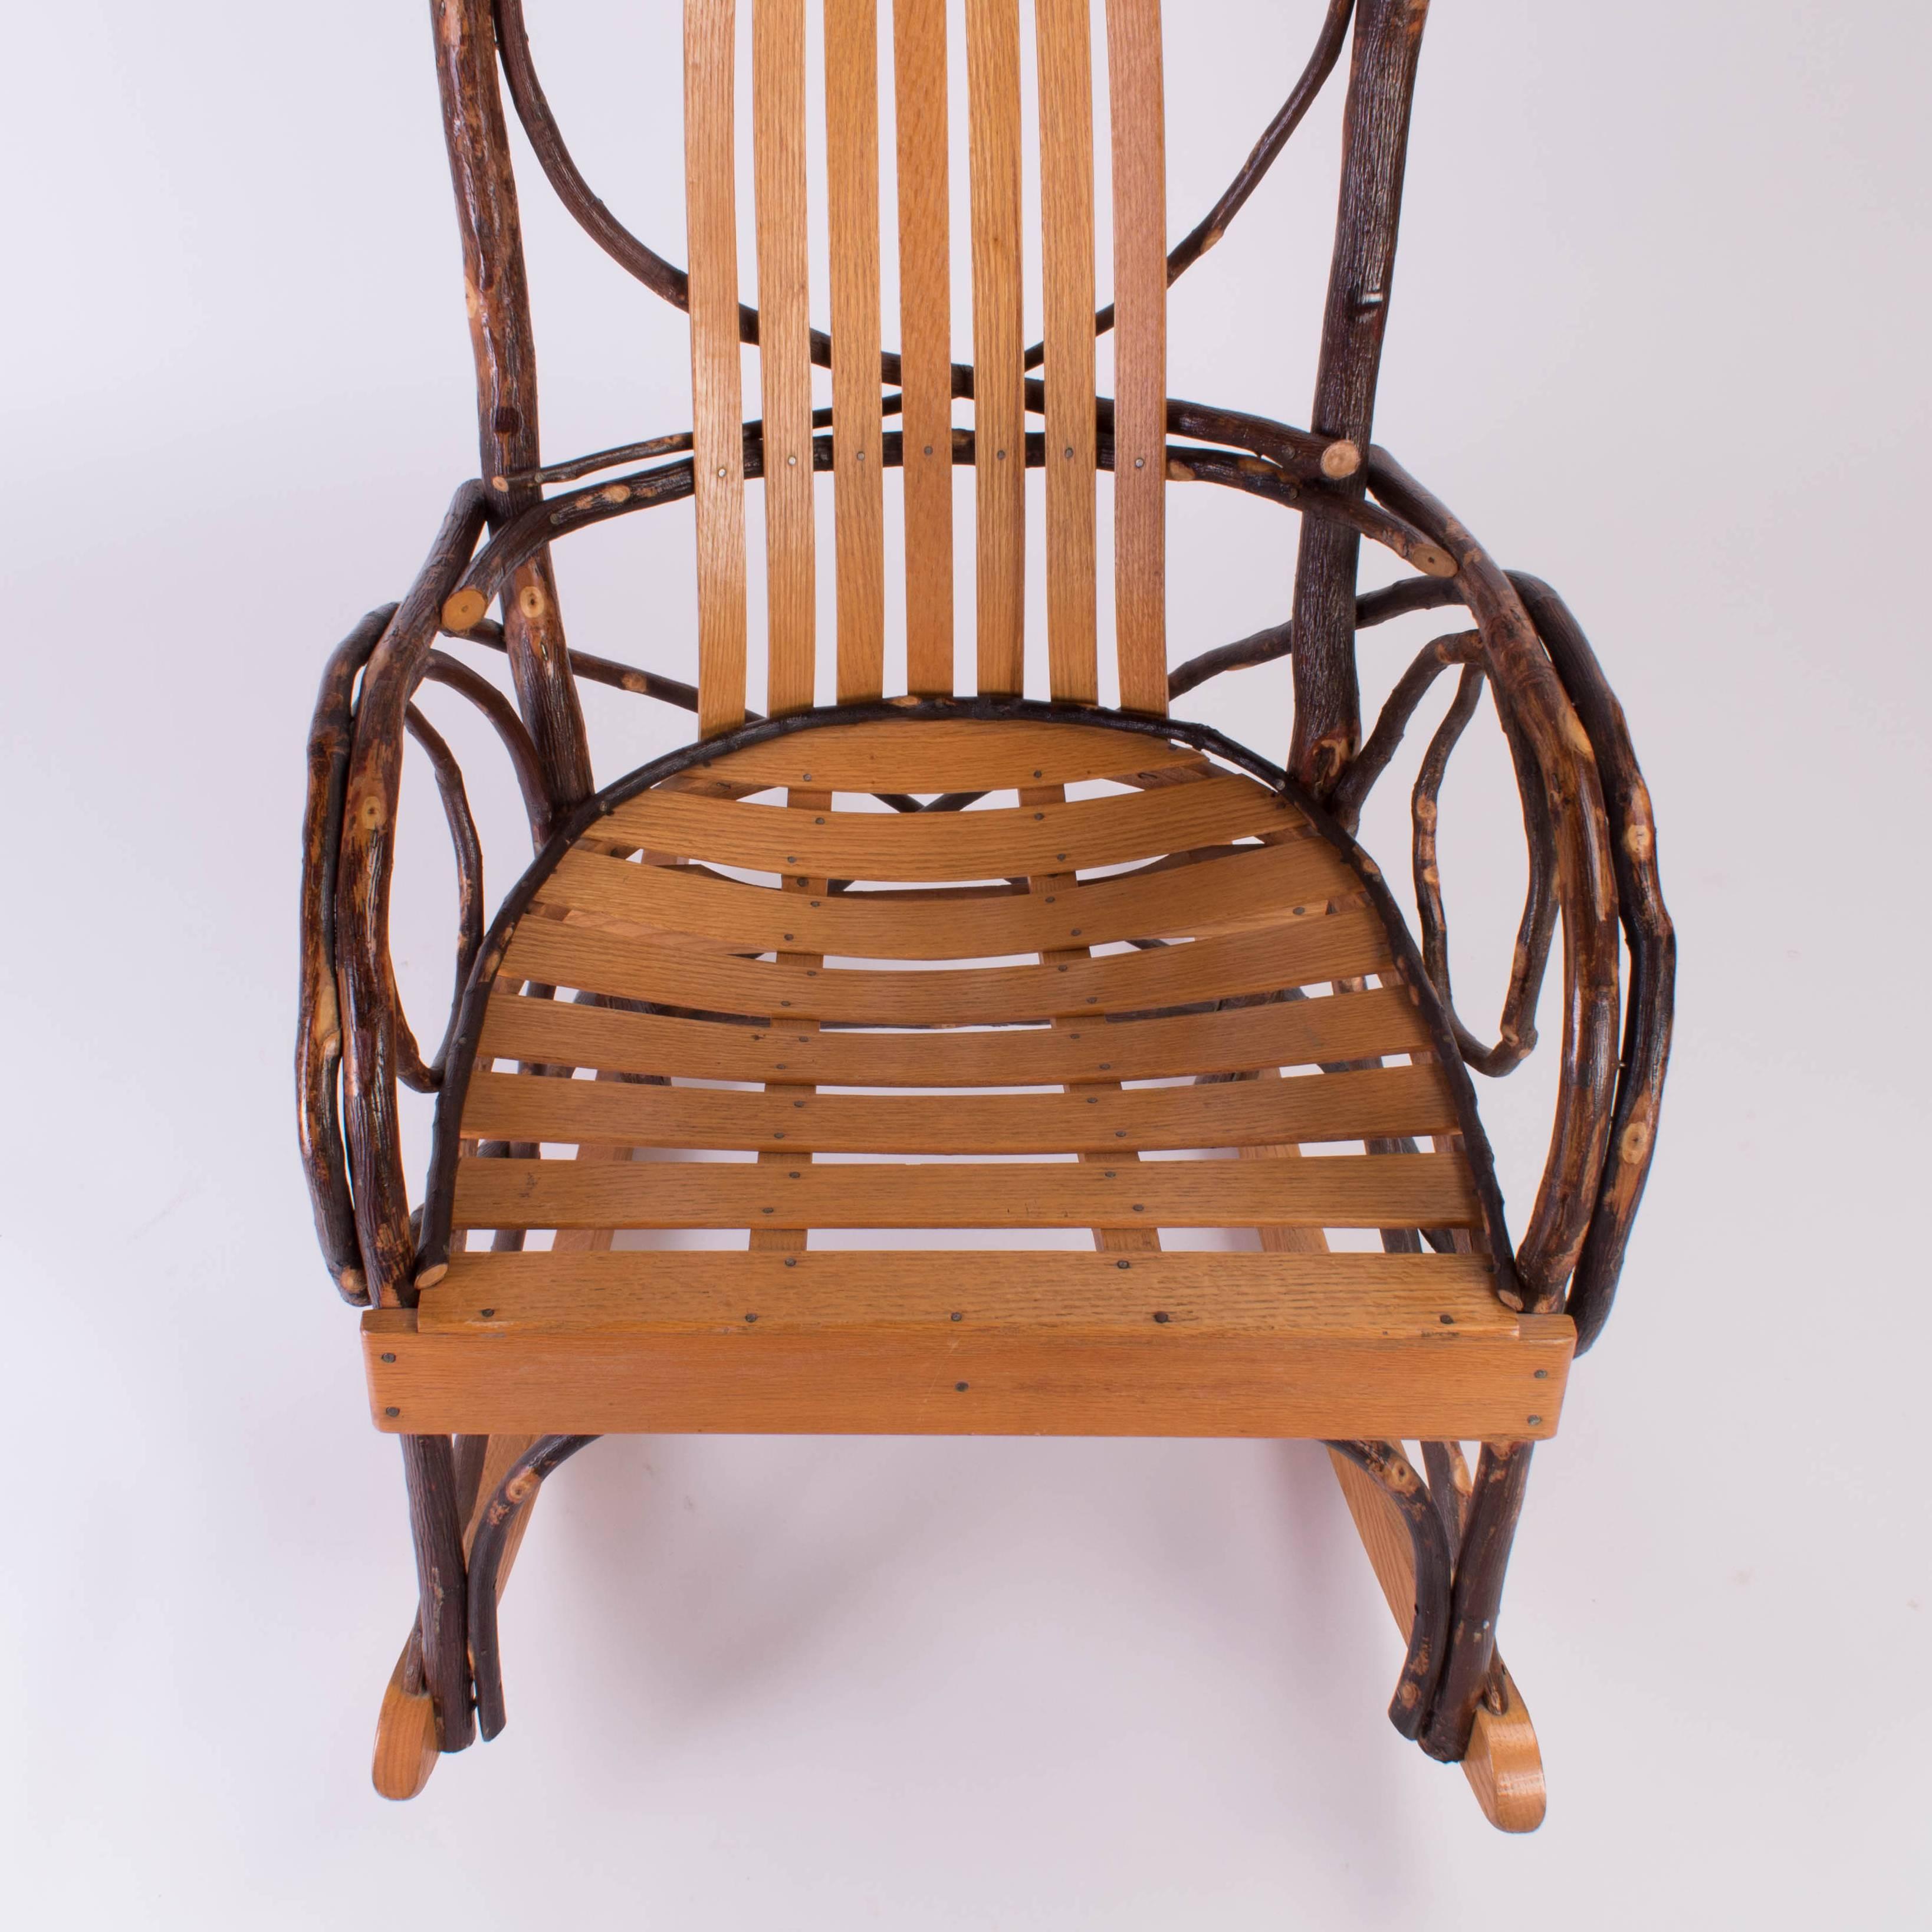 Slated Wood and Tree Branch Artist Studio Rocking Chair  2